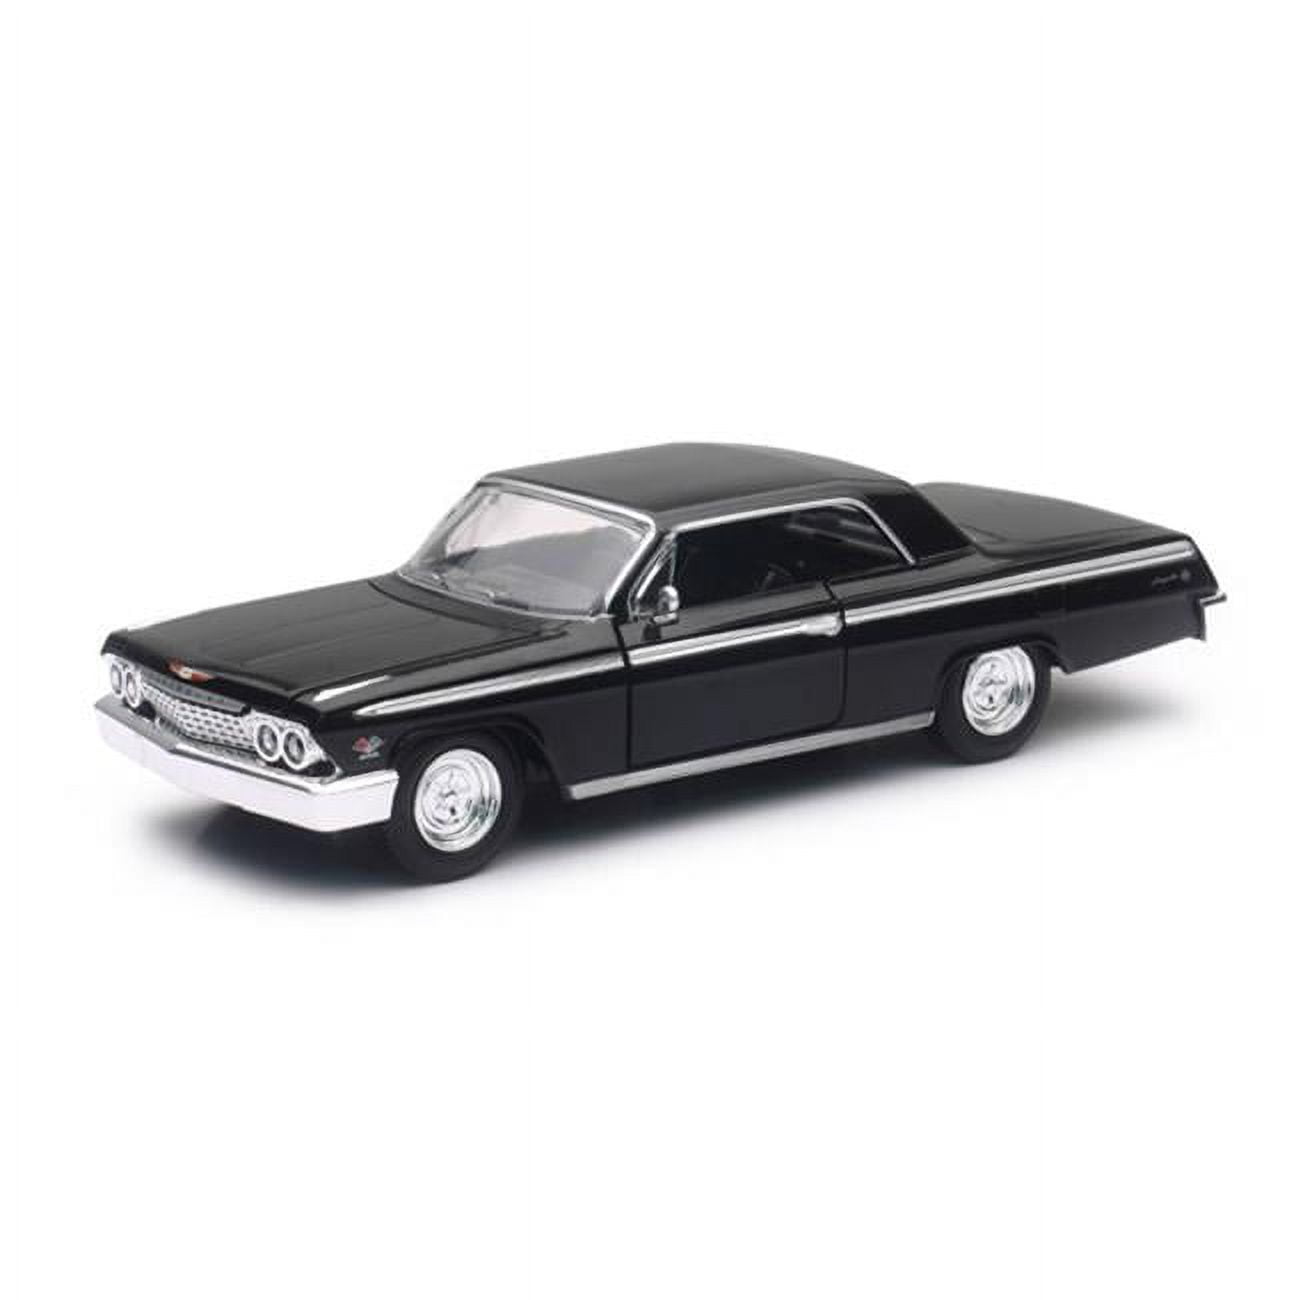 Picture of B2bBreplicas NEW71843A 1962 Chevrolet Impala SS, Black